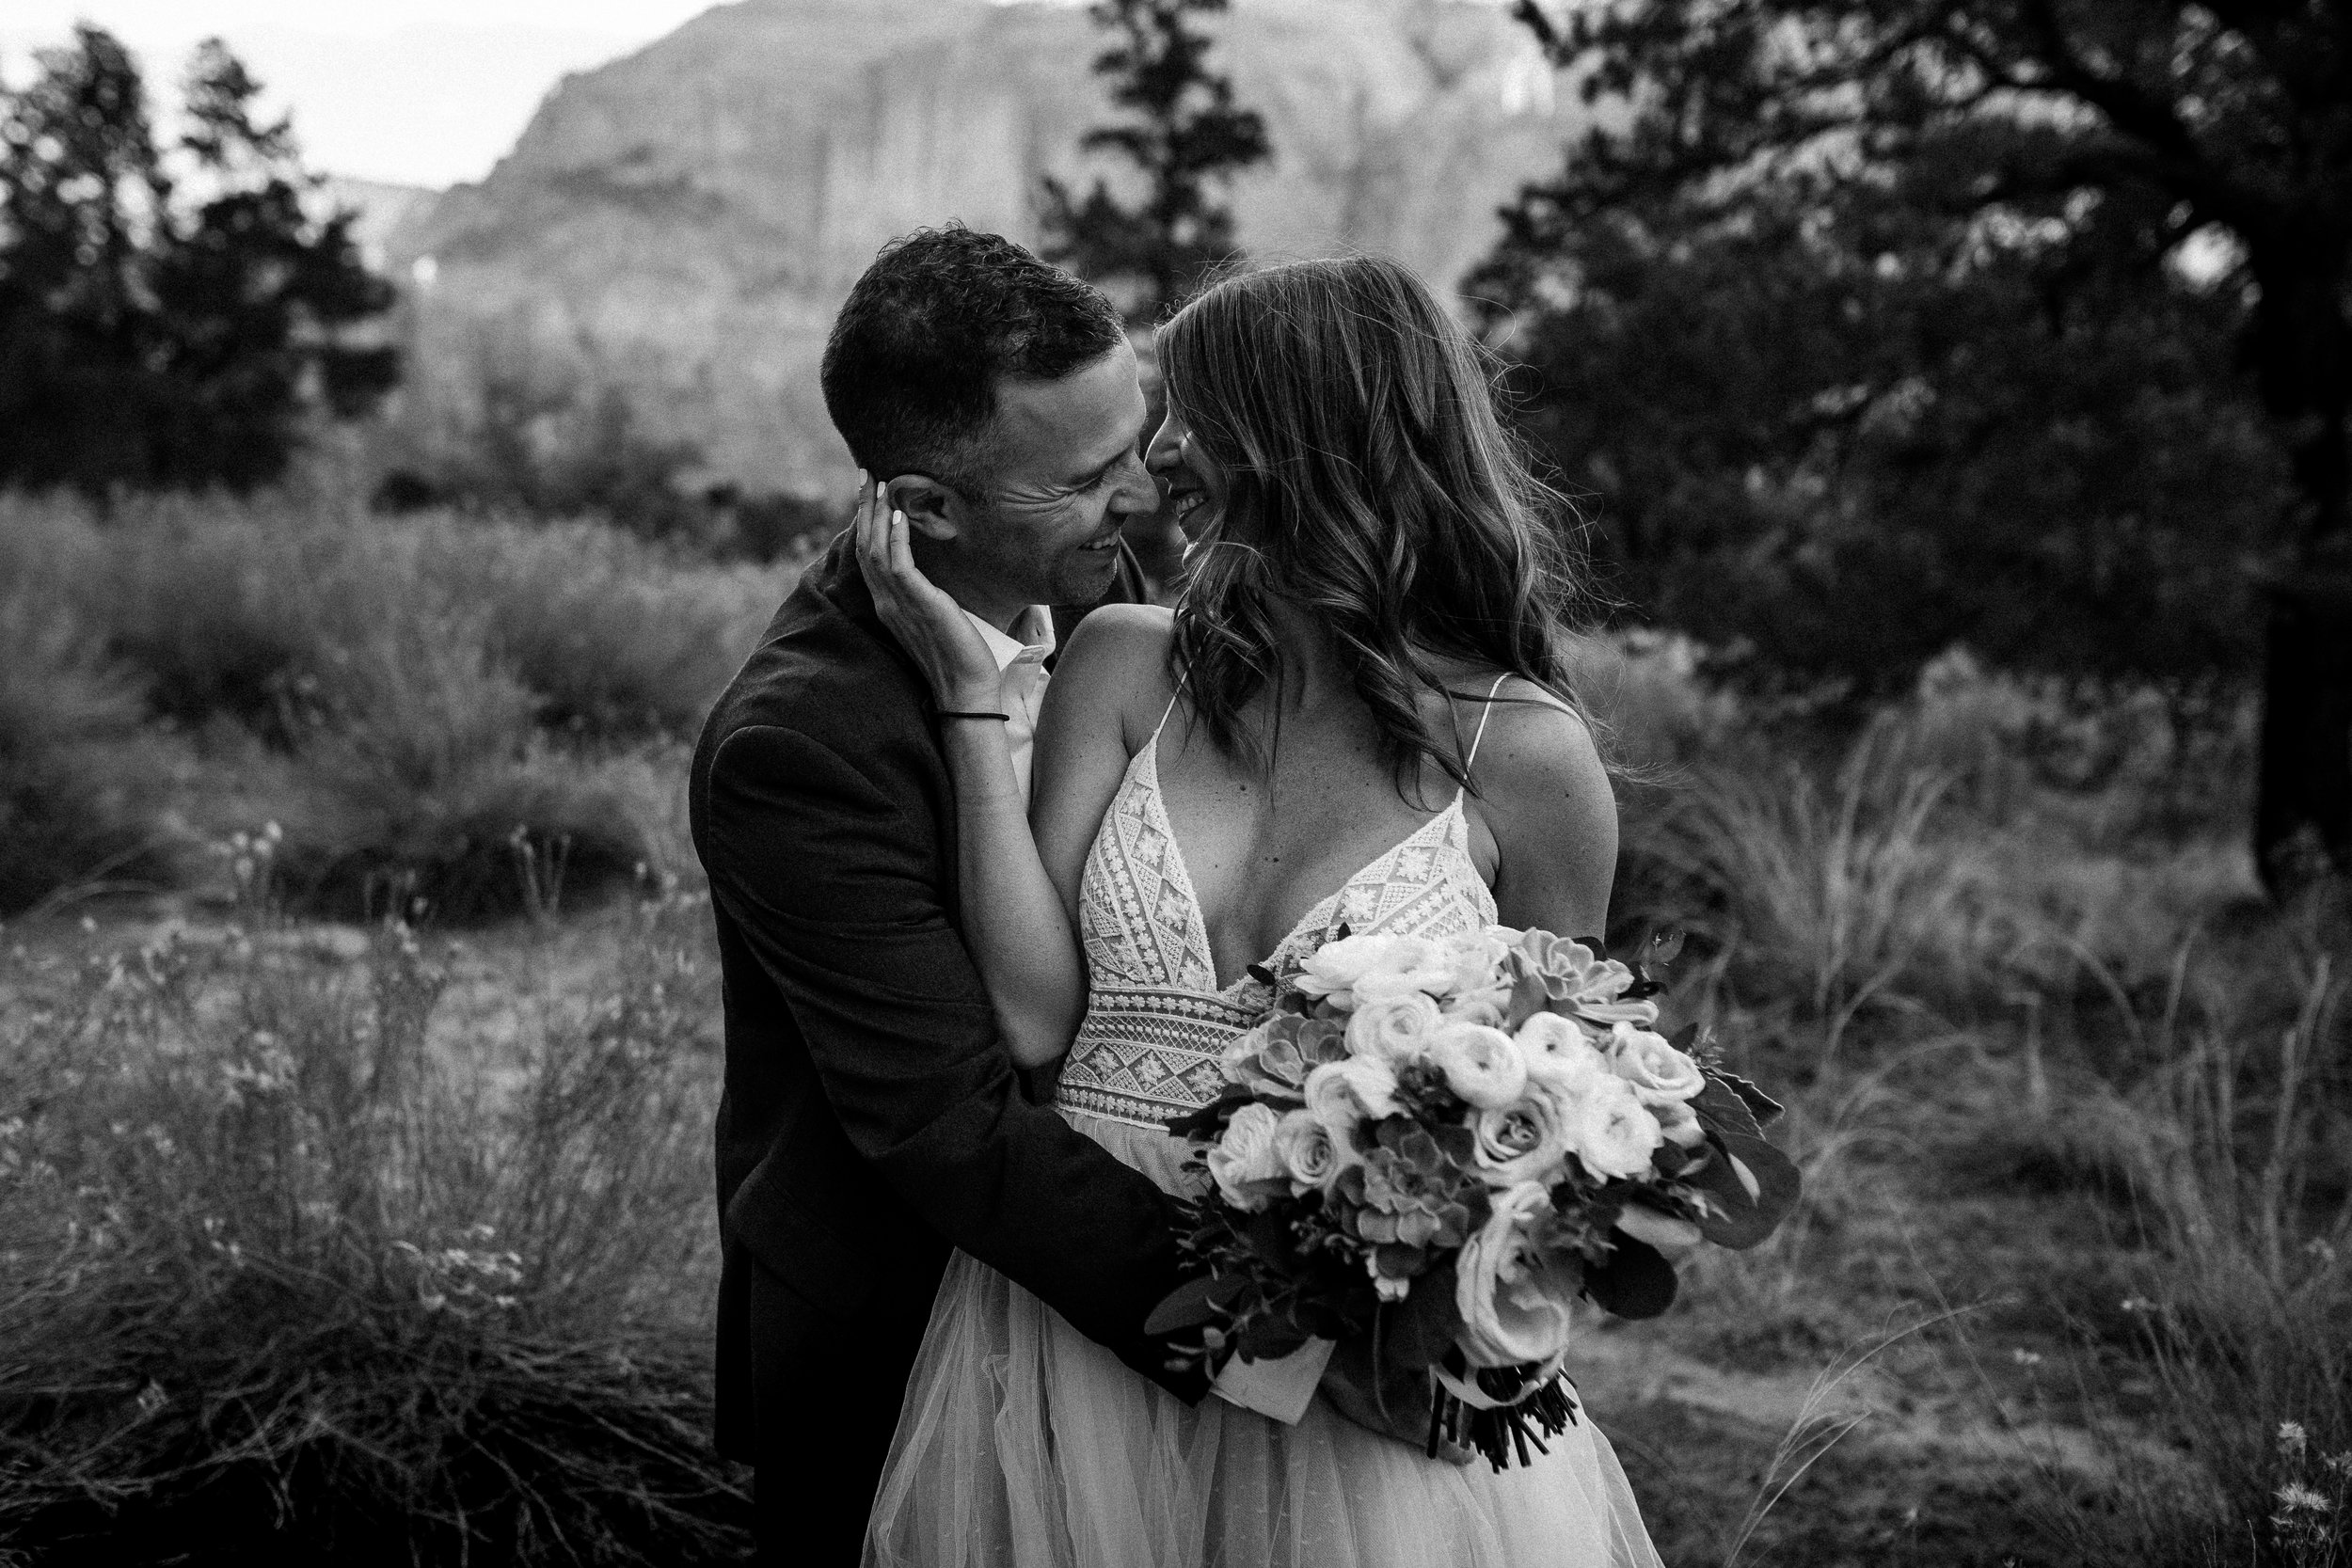 nicole-daacke-photography-zion-national-park-elopement-photographer-canyon-overlook-trail-elope-hiking-adventure-wedding-photos-fall-utah-red-rock-canyon-stgeorge-eloping-photographer-21.jpg